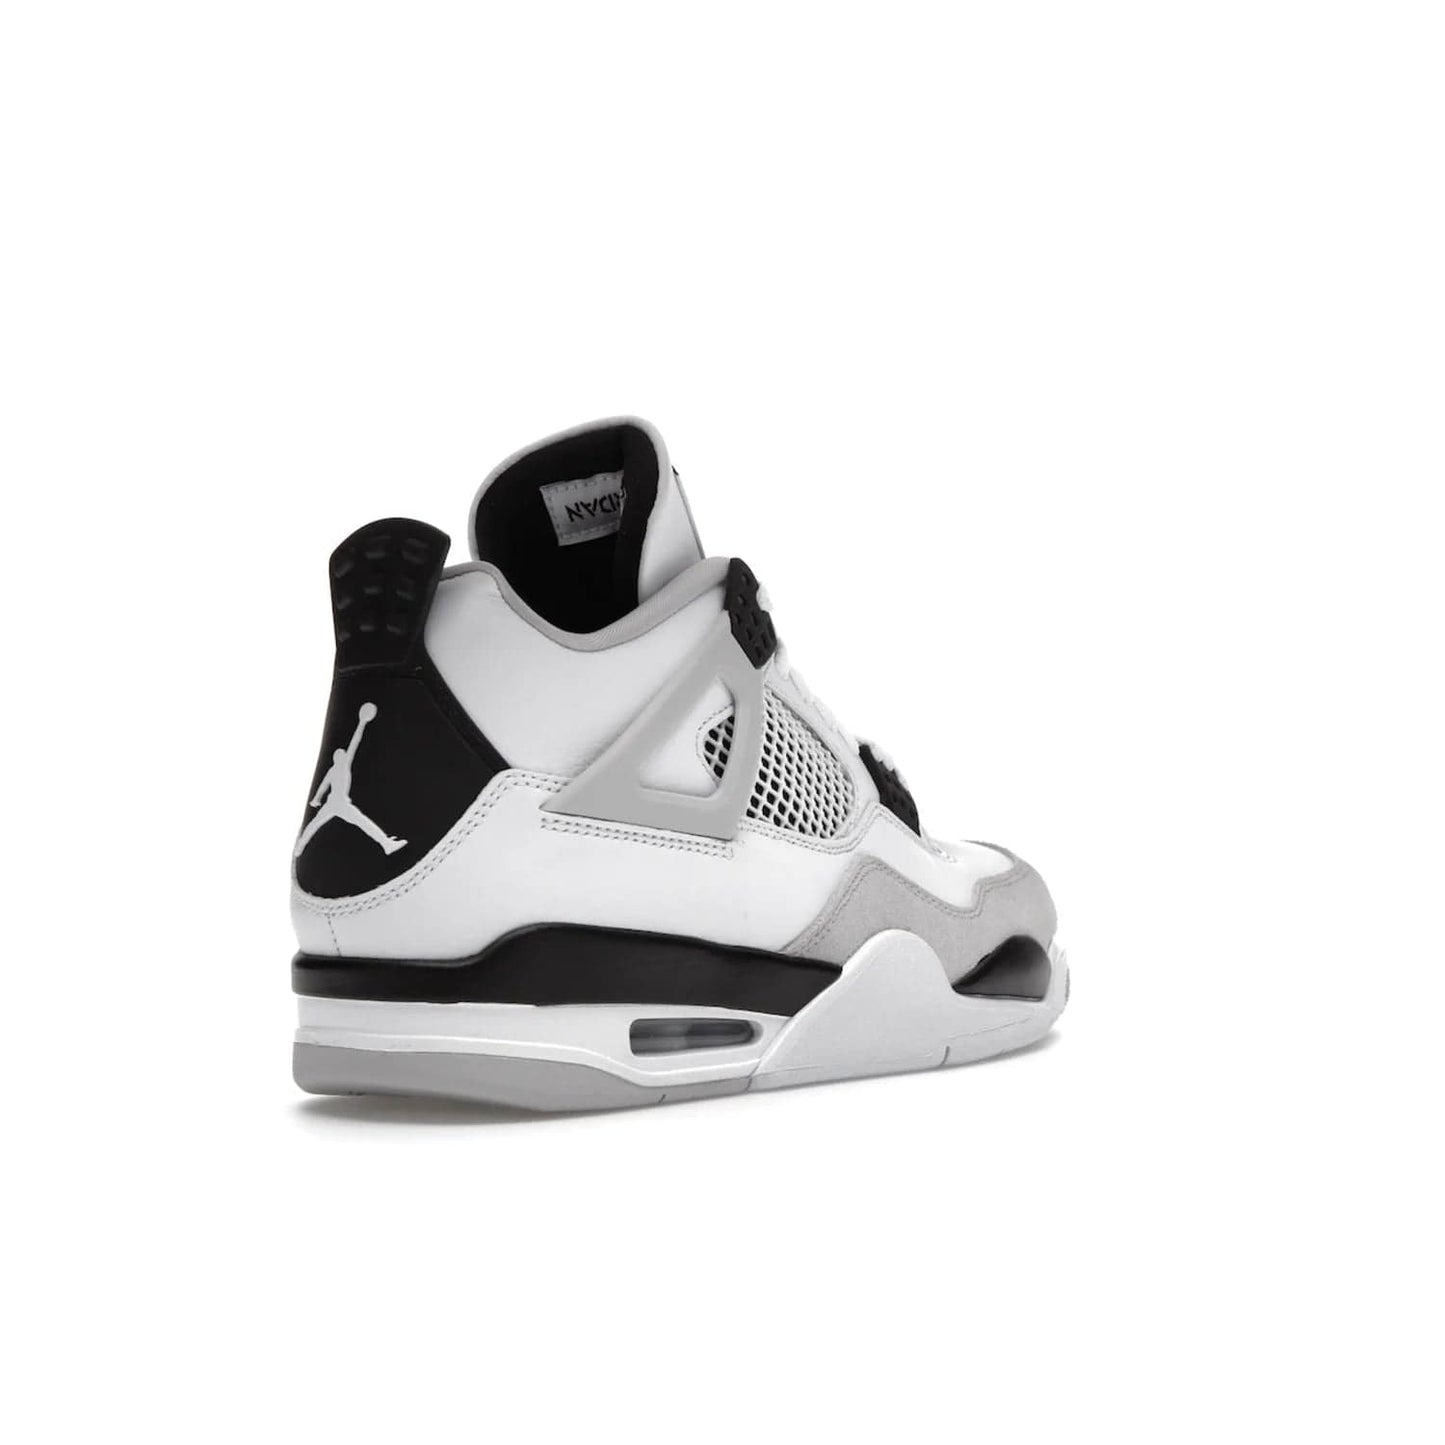 Jordan 4 Retro Military Black - Image 32 - Only at www.BallersClubKickz.com - Updated Air Jordan 4 style with a white/black/light grey sole and visible Air unit. Released in May 2022, offering timeless classic style and comfort.